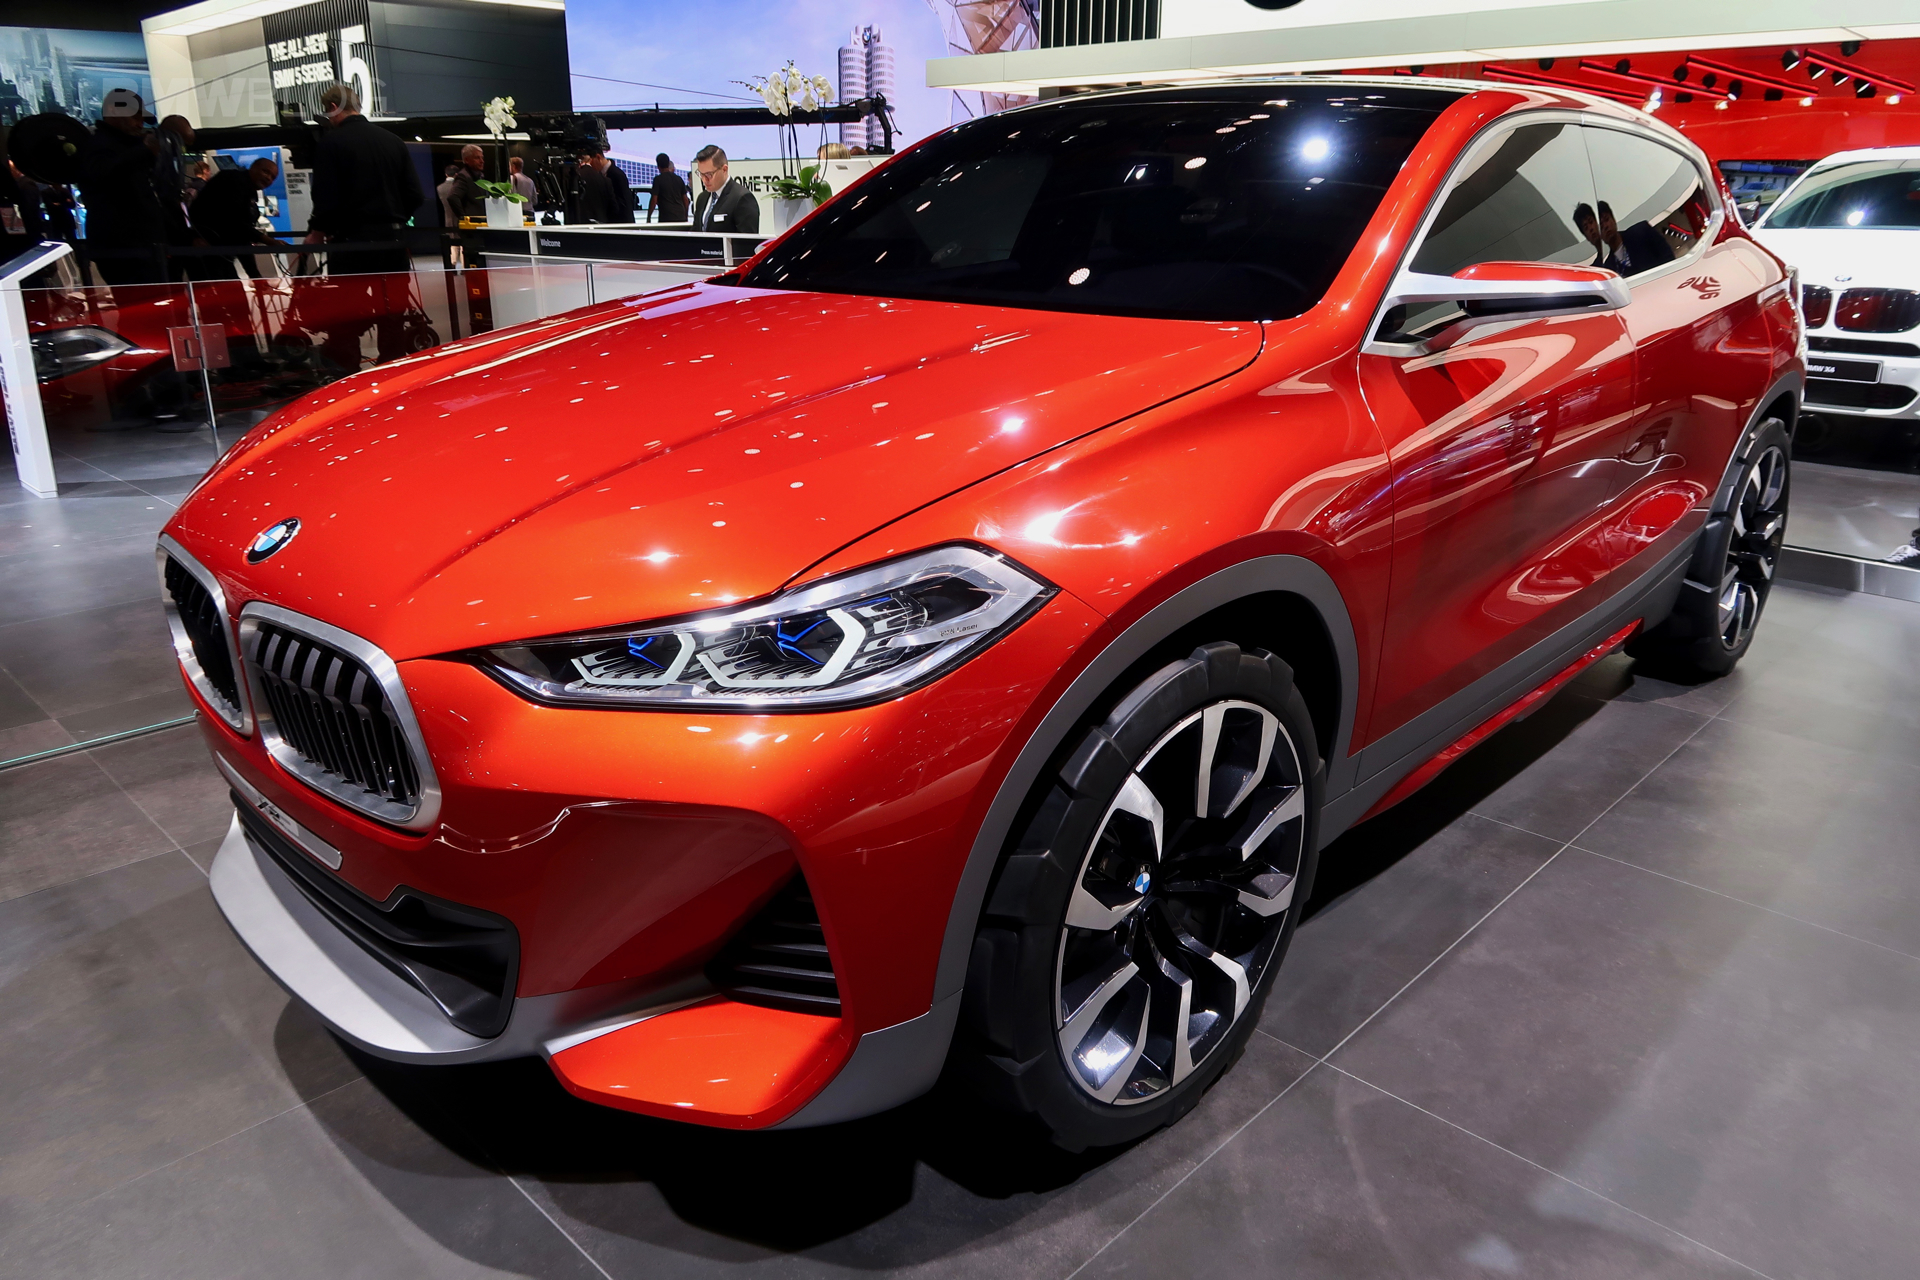 The motors of the BMW X2 uncovered